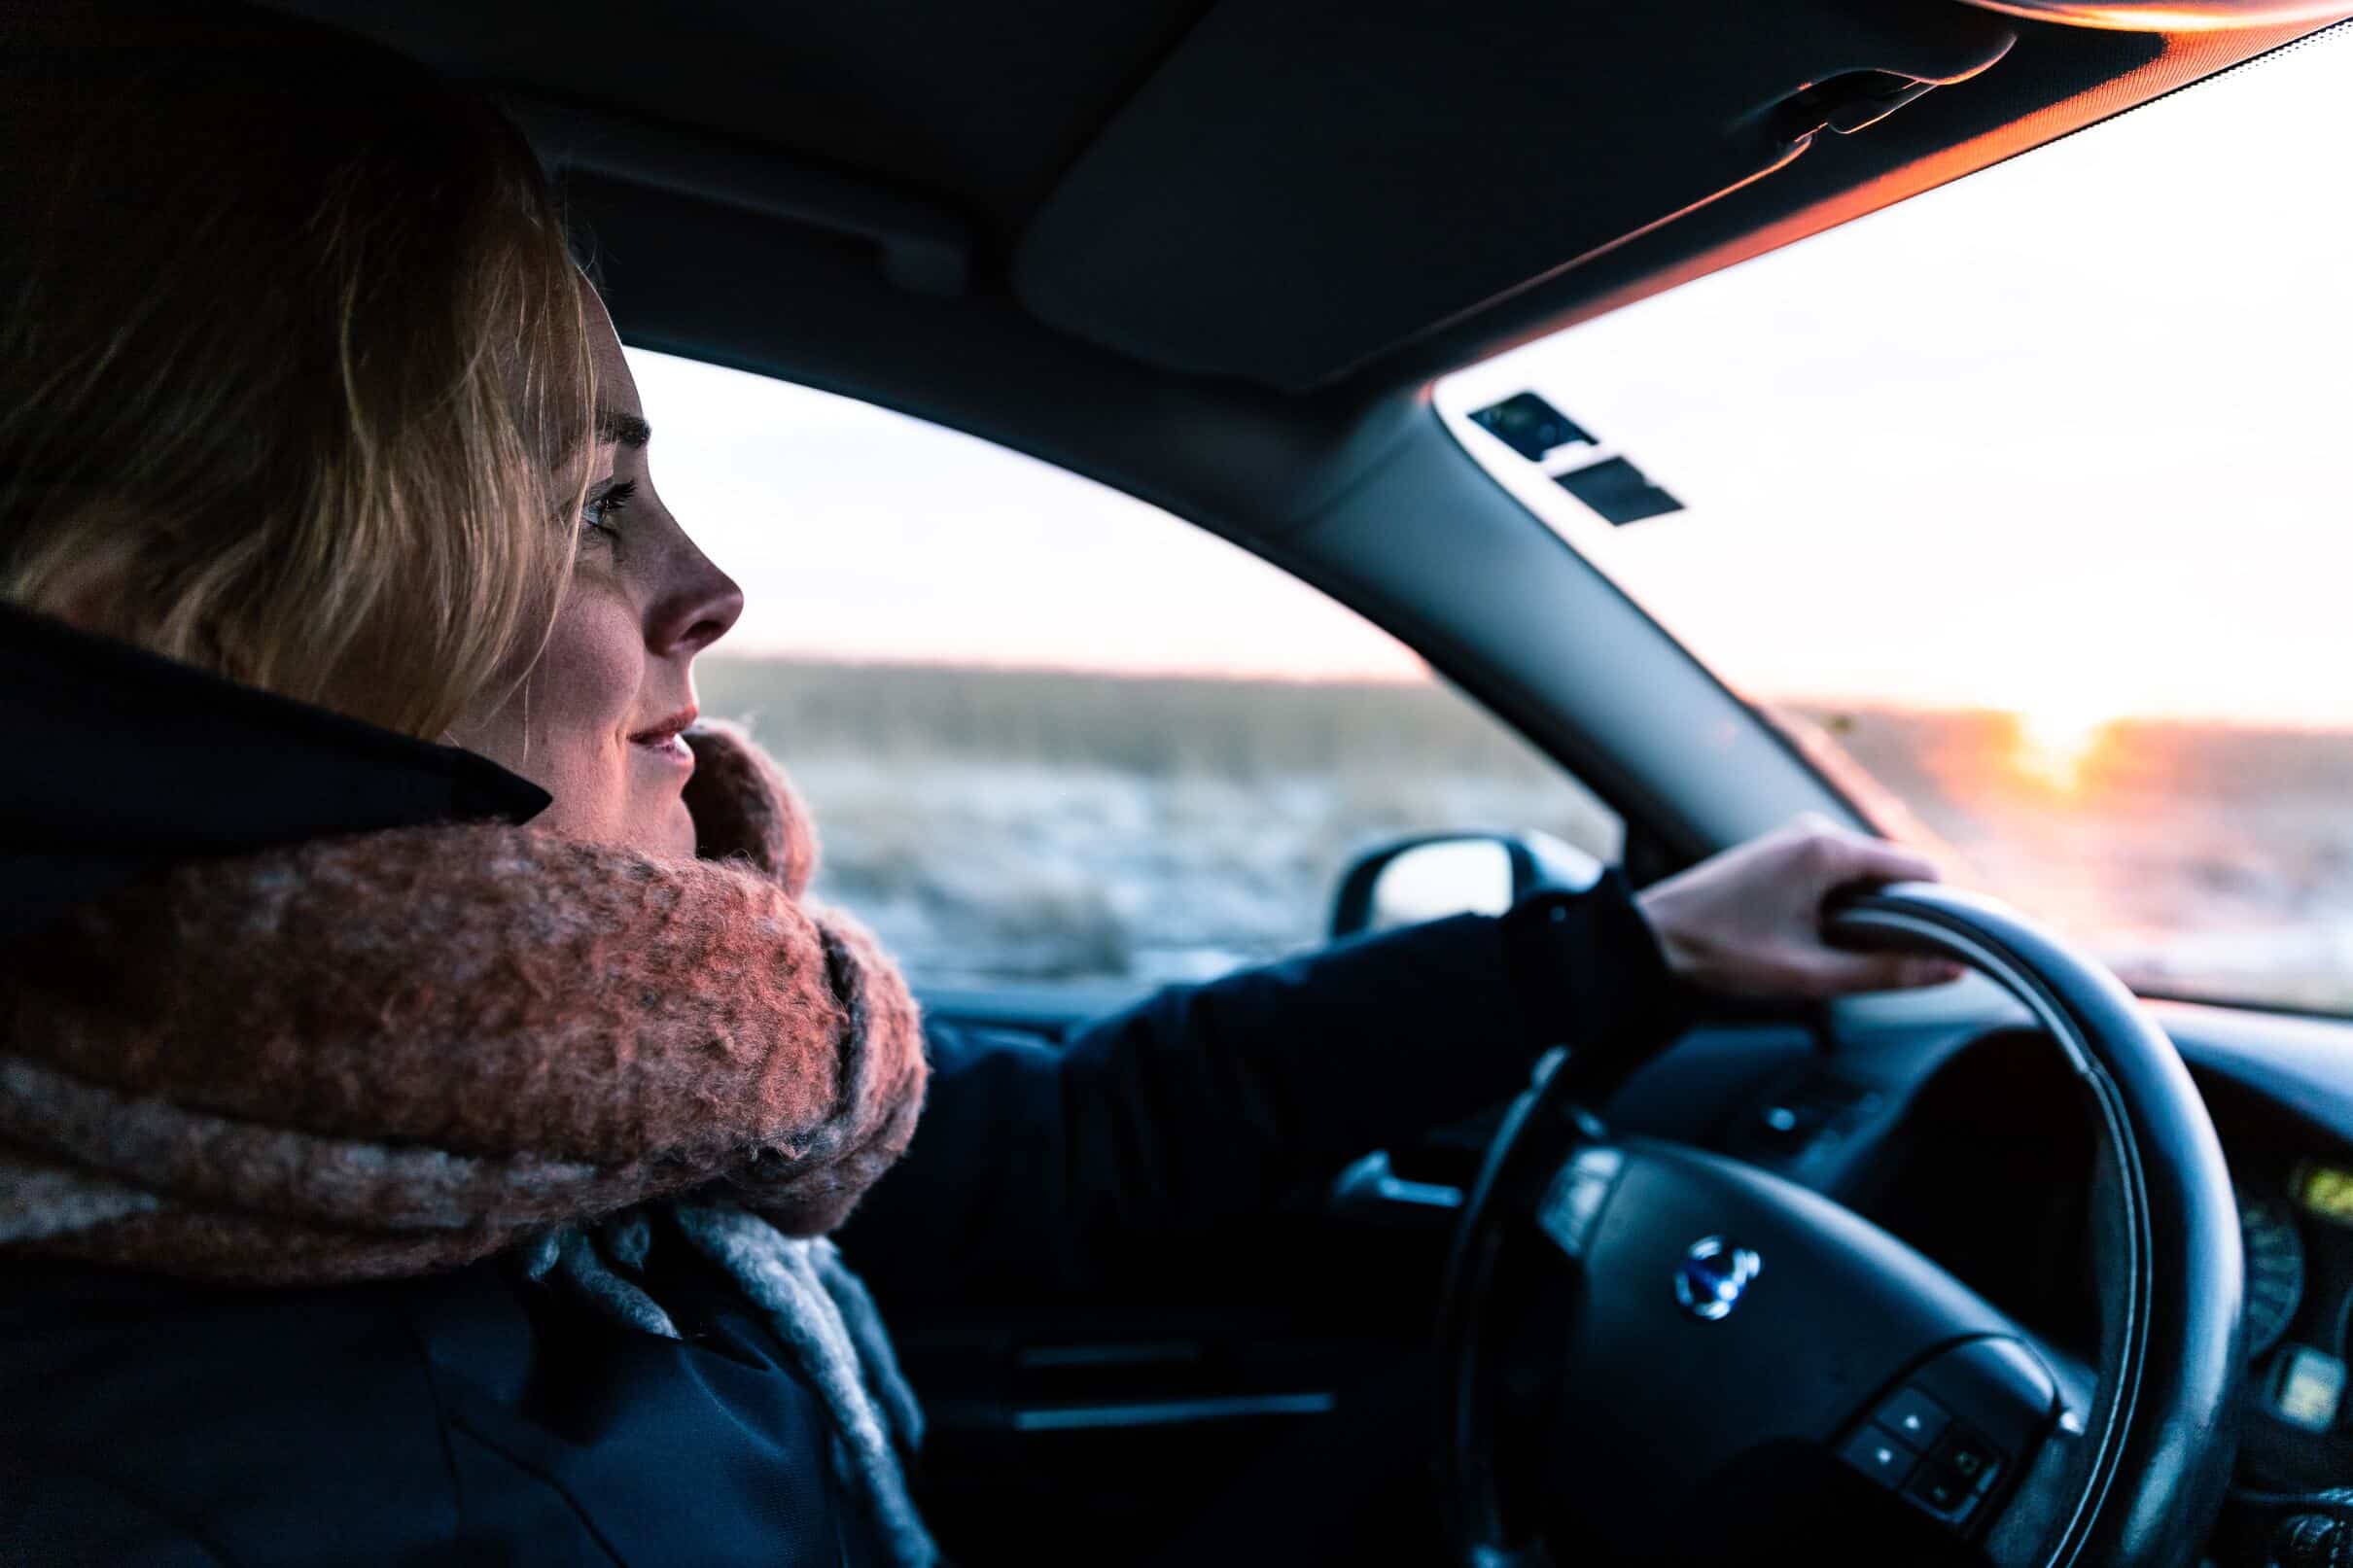 A woman behind the wheel, navigating through a snowy winter landscape.